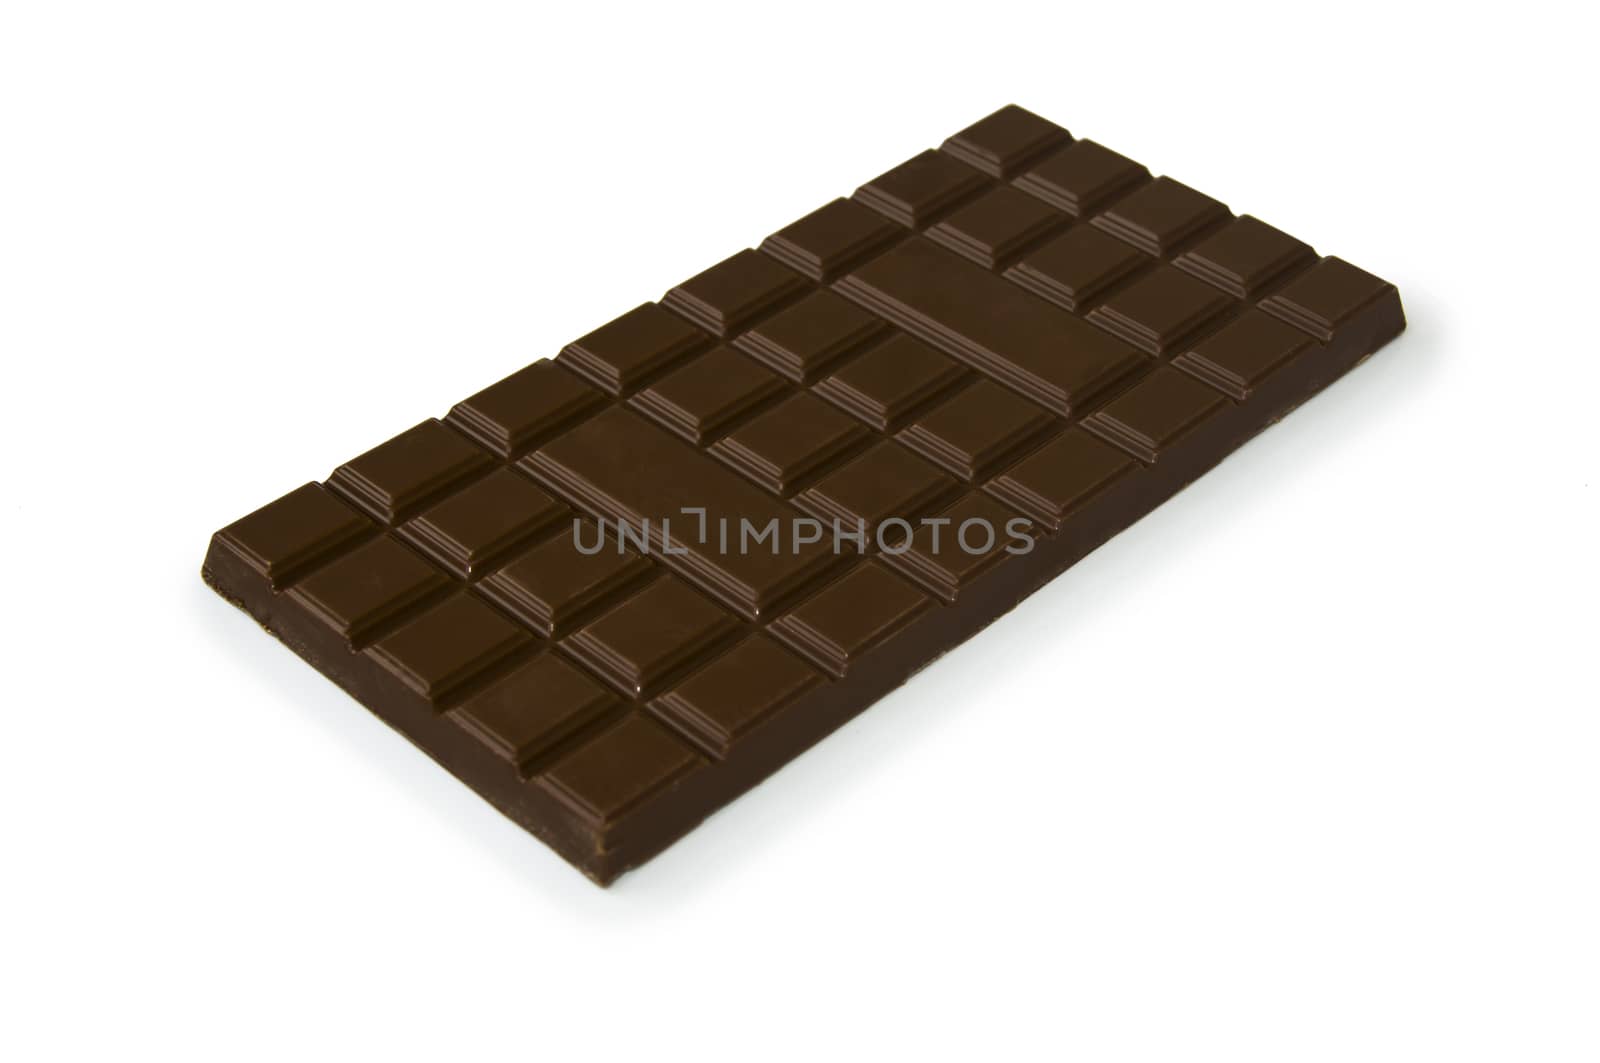 Bar of chocolate. For your commercial and editorial use